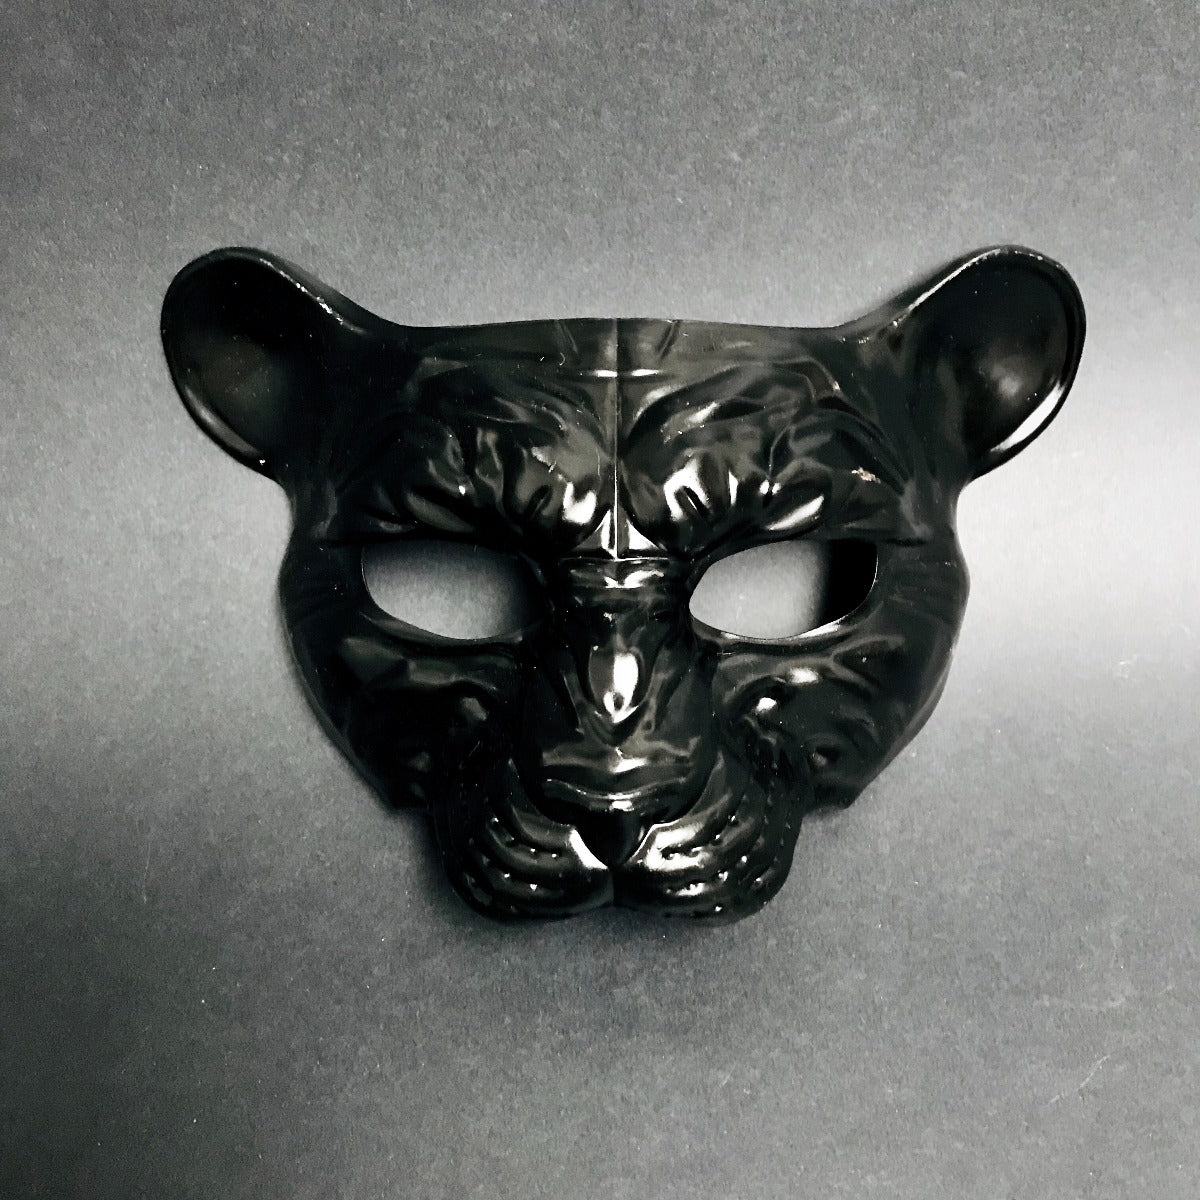 Black panther masquerade mask for sale.